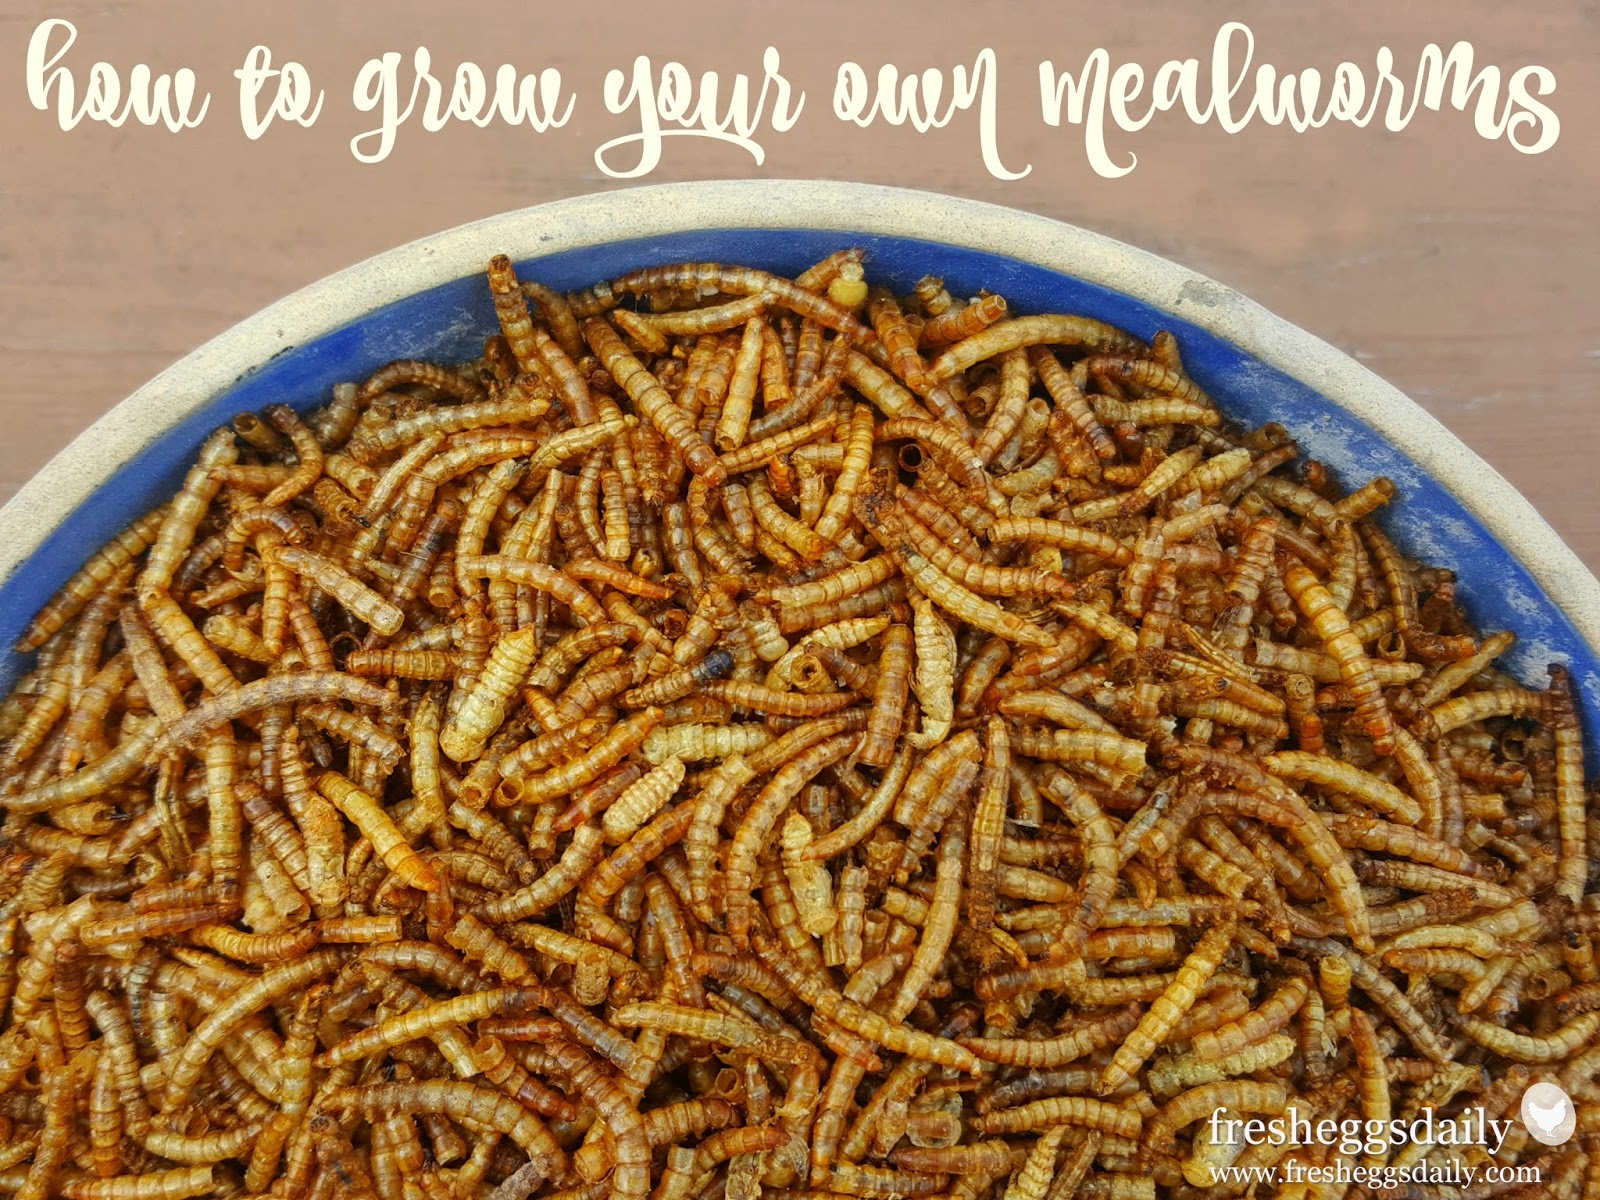 Research paper mealworm